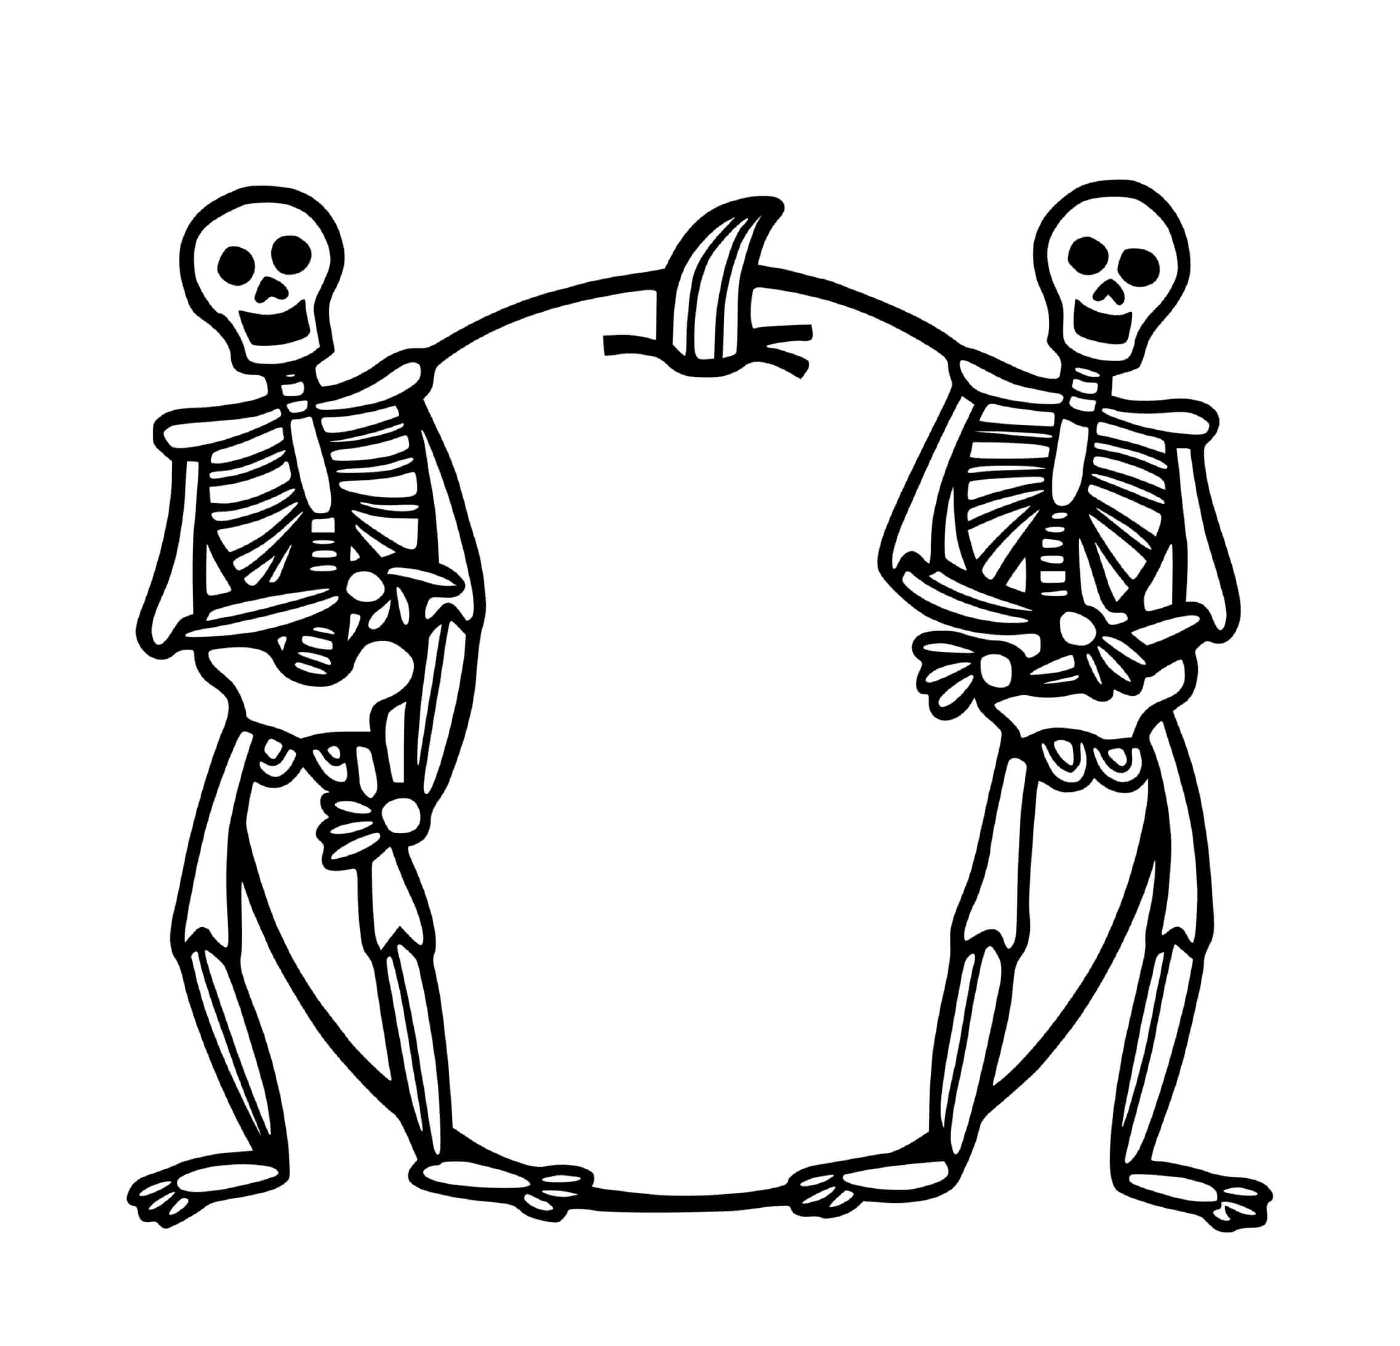  Halloween, skeleton, standing by the hand 